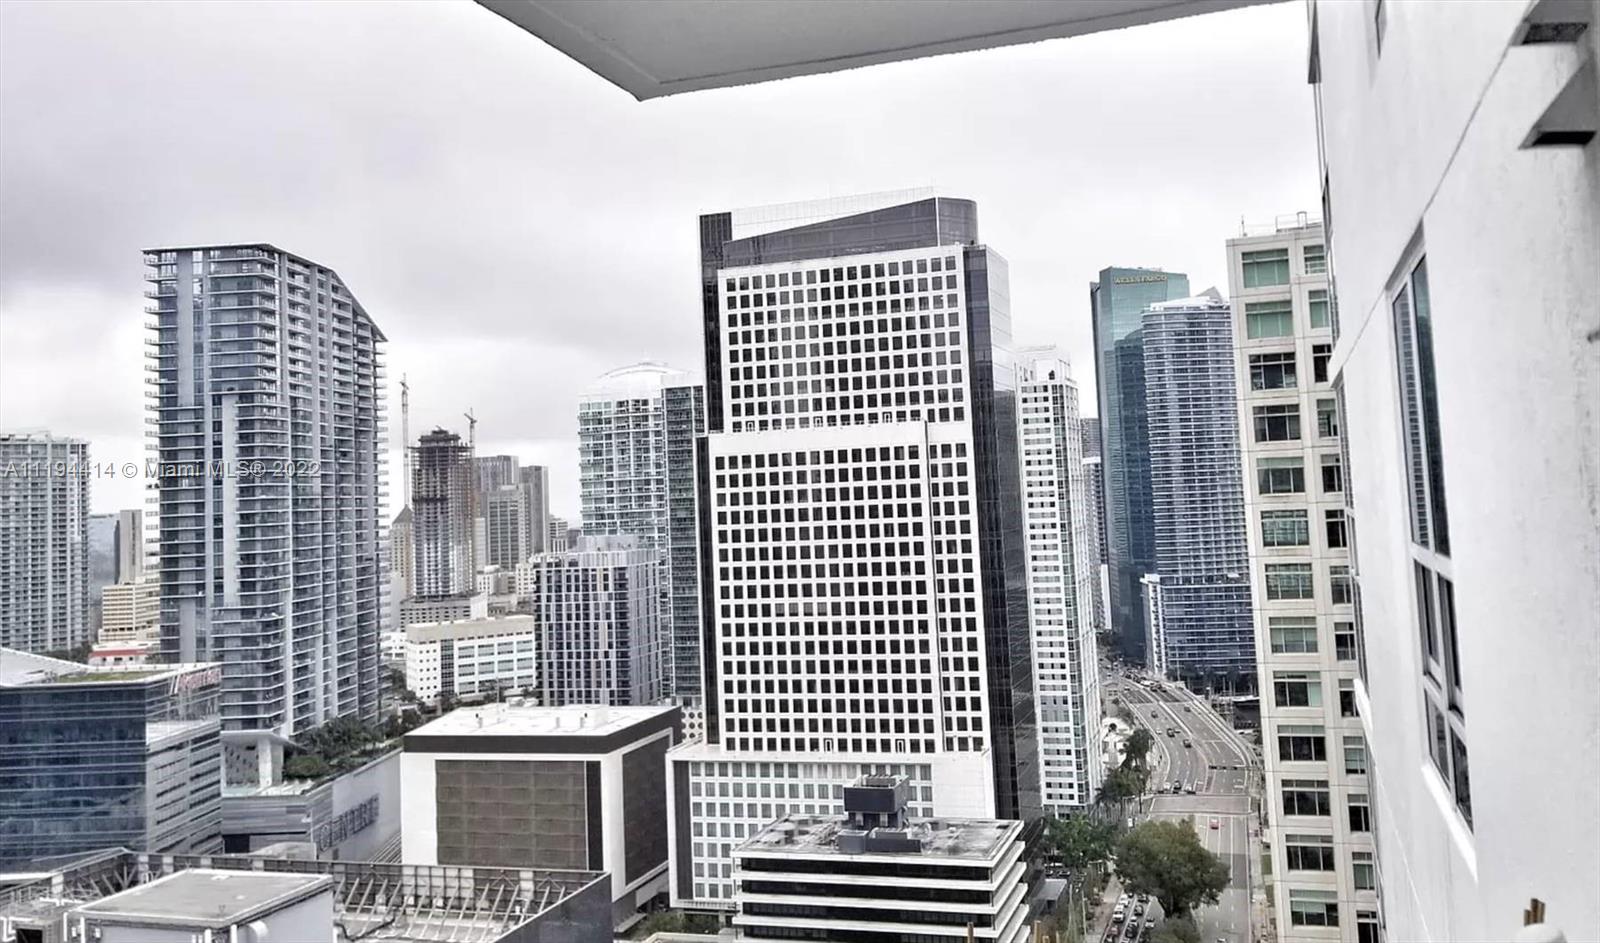 The Plaza on Brickell South image #17